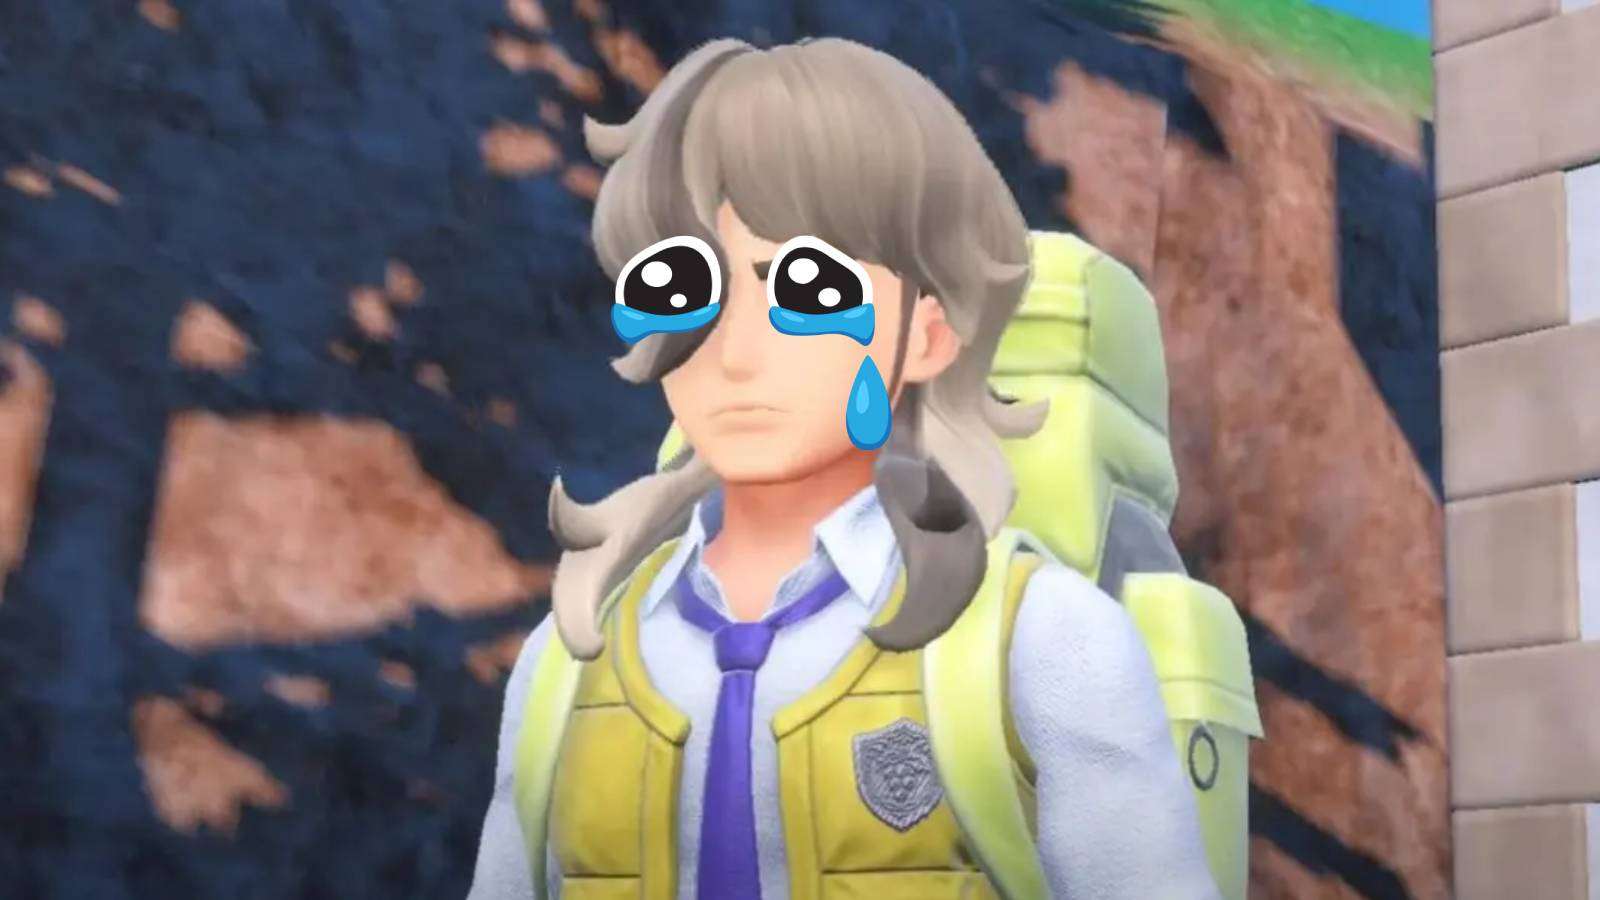 A still from Pokemon Scarlet & Violet shows the trainer Arven, but they have cartoon crying eyes placed over their real expression